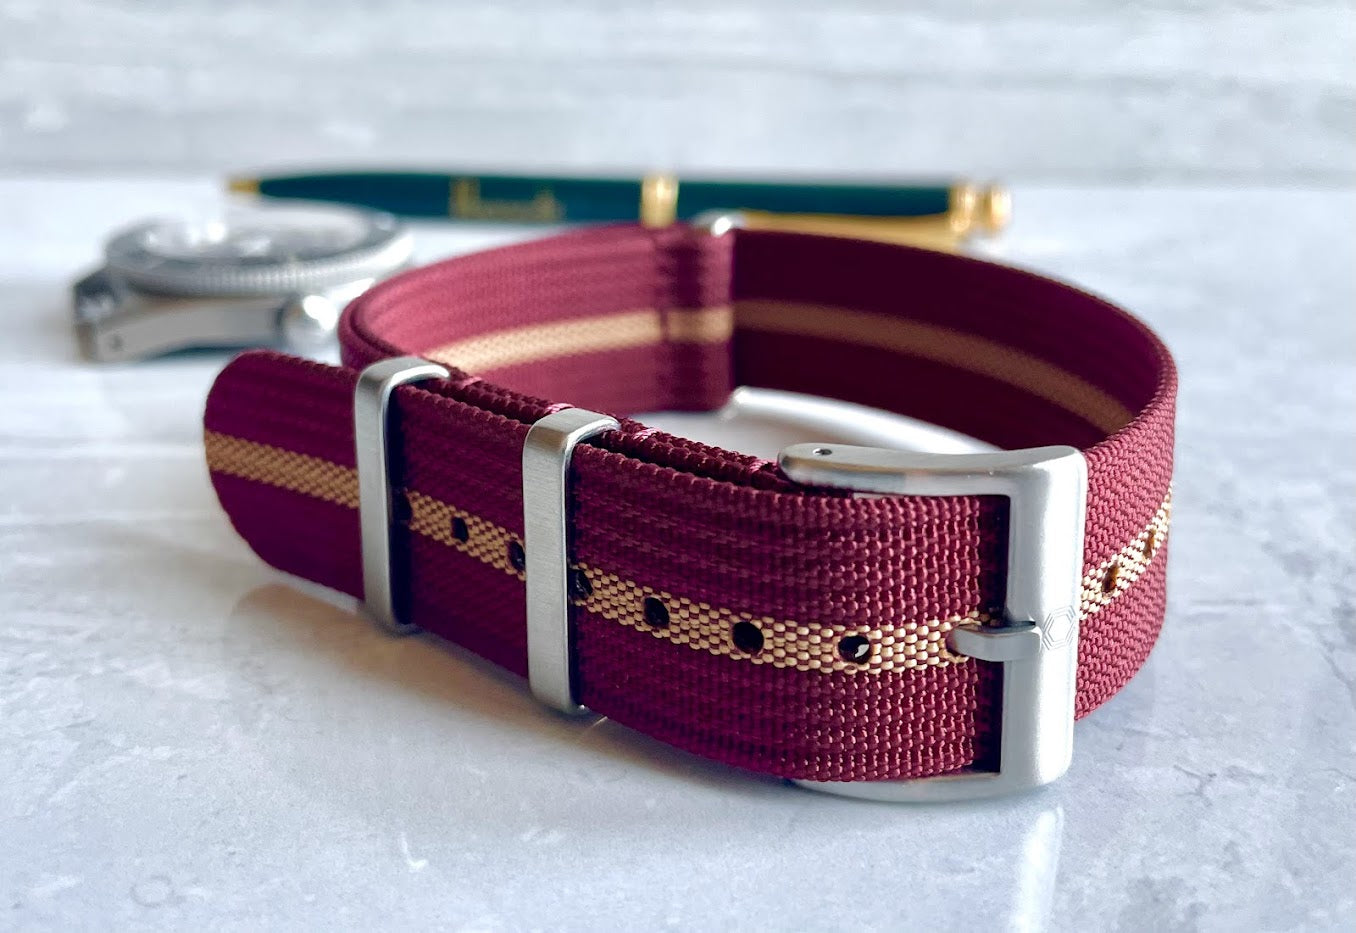 The 'River Oak' - Burgundy and beige adjustable watch strap made of ribbed nylon